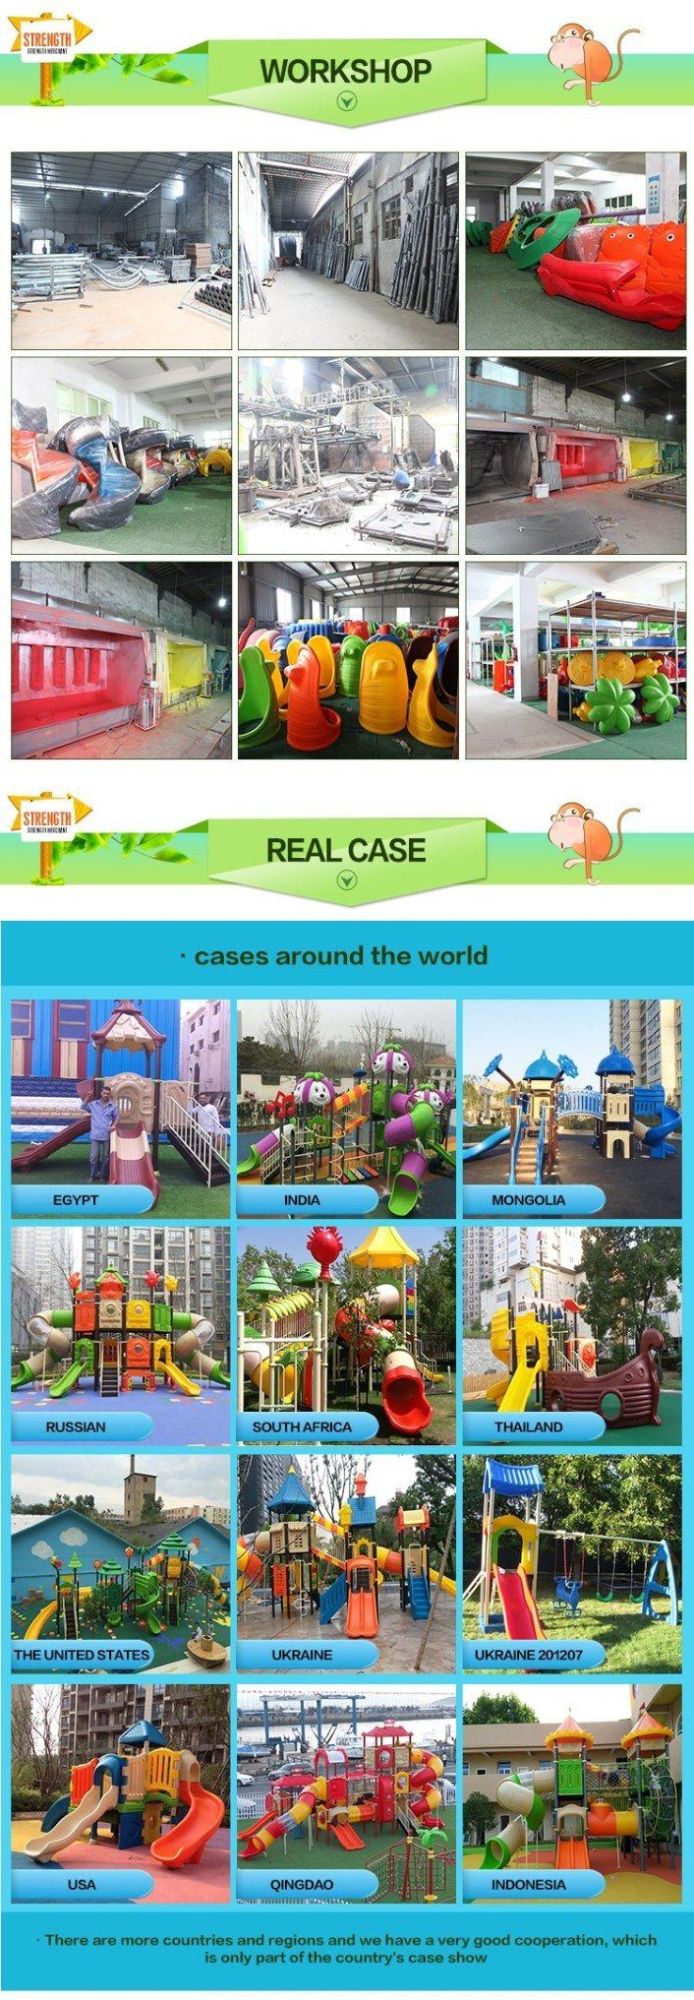 Pirate Theme Park Equipments Good for Parents and Kids Outdoor Park Playground